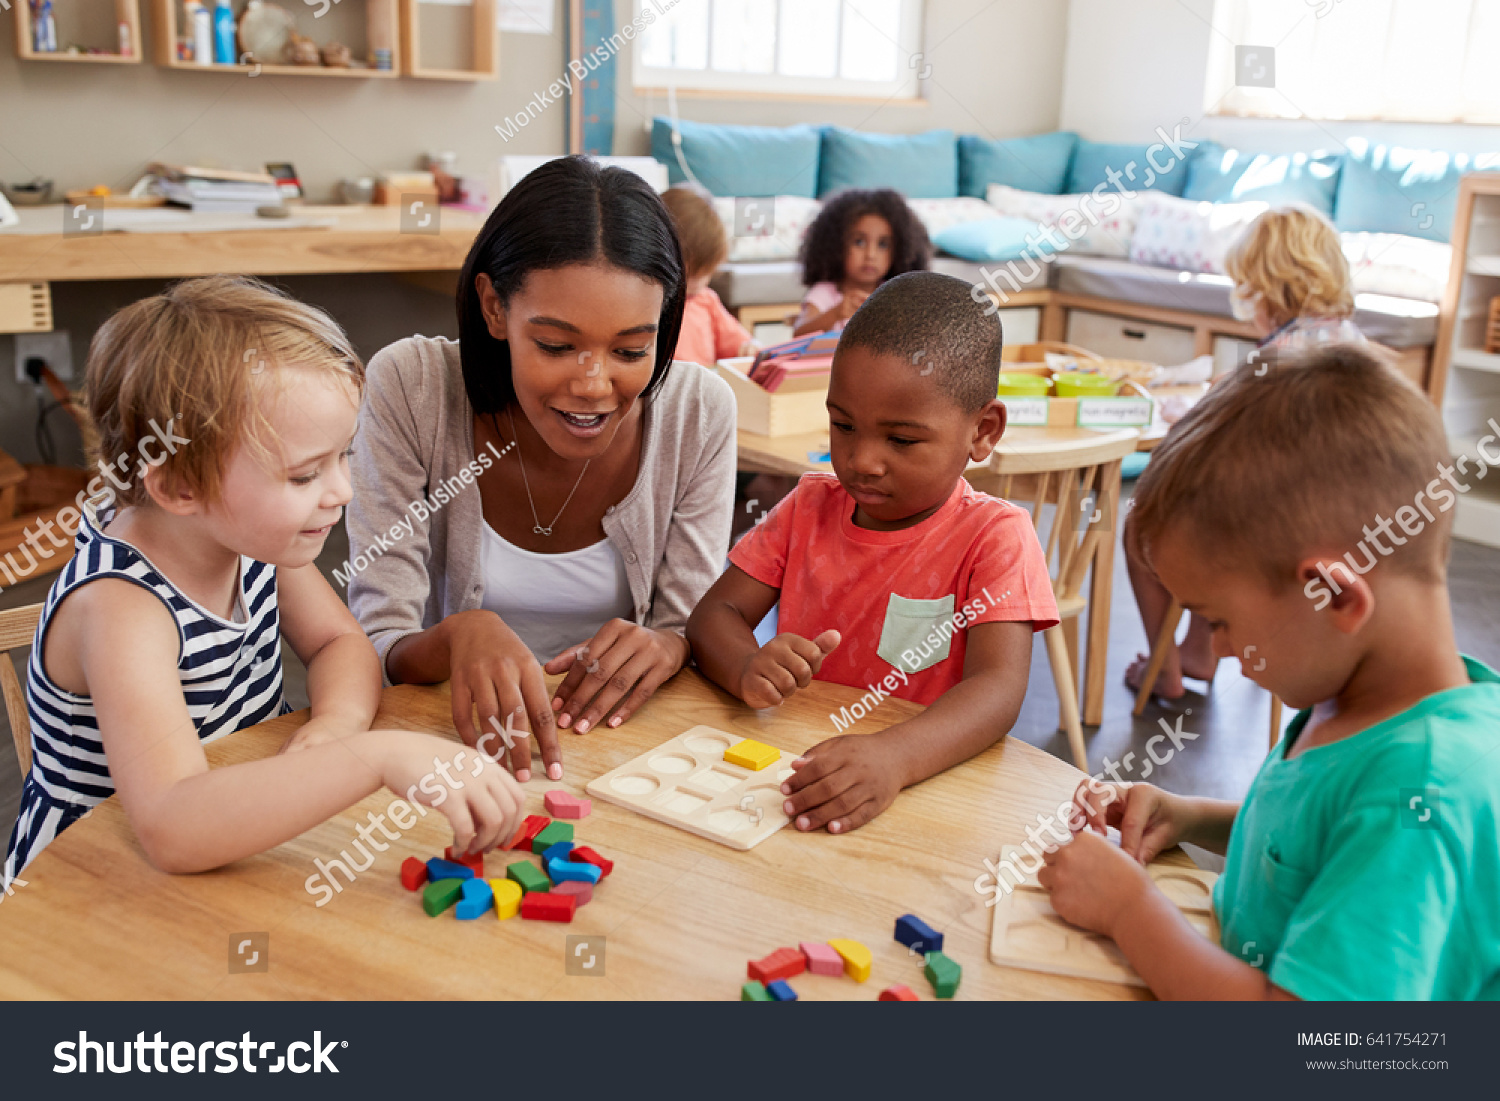 Teacher And Pupils Using Wooden Shapes In Montessori School #641754271